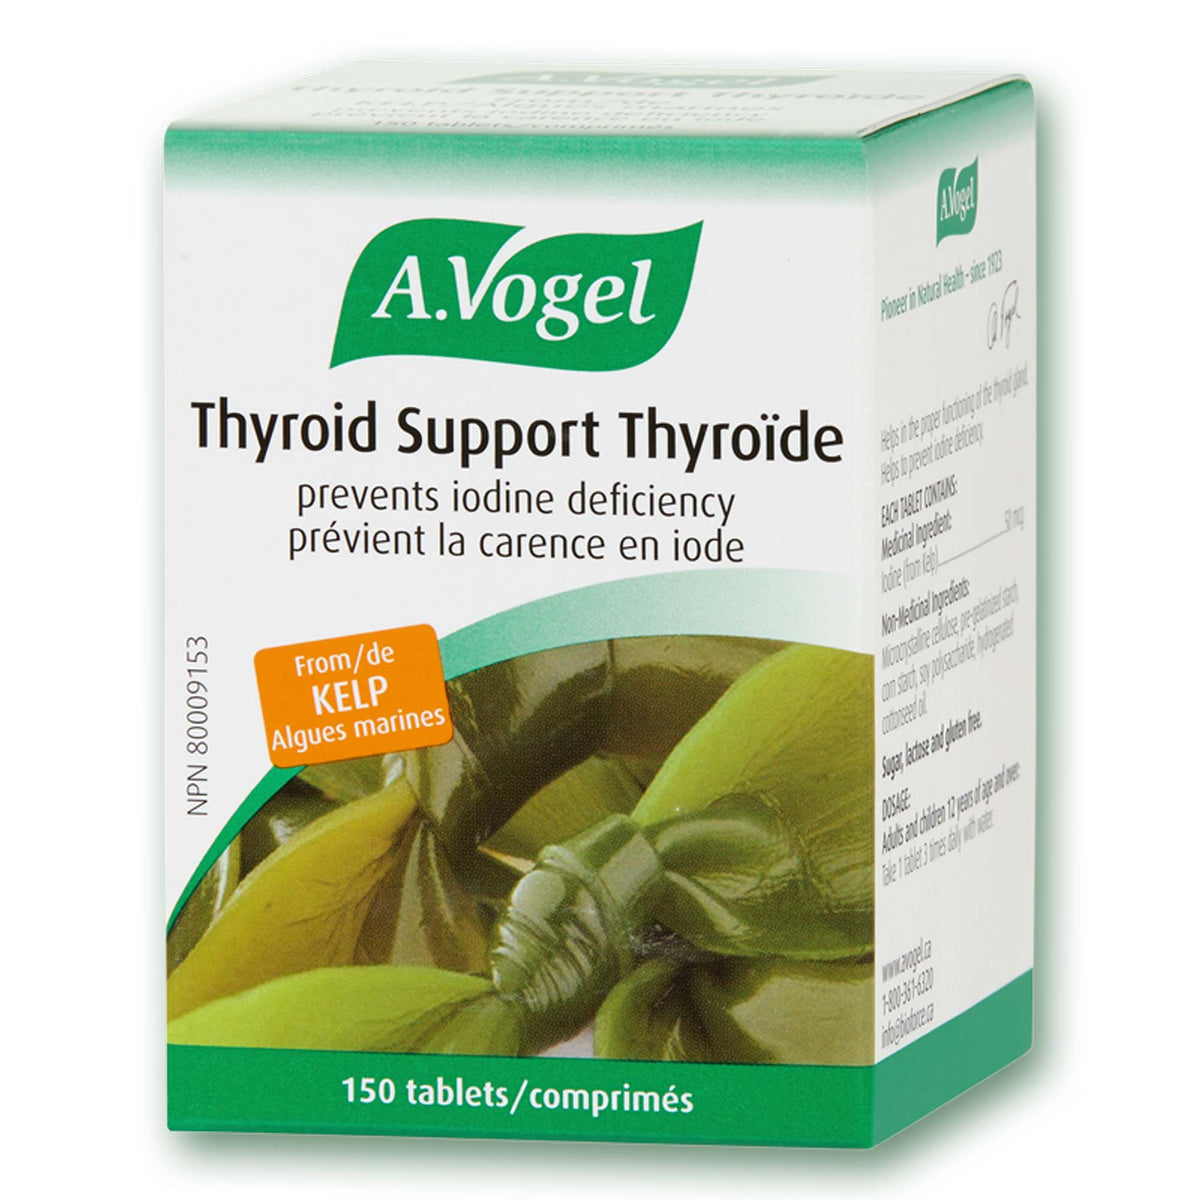 Thyroid Support - Prevents Iodine Deficiency 150 Tabs - A.Vogel Canada